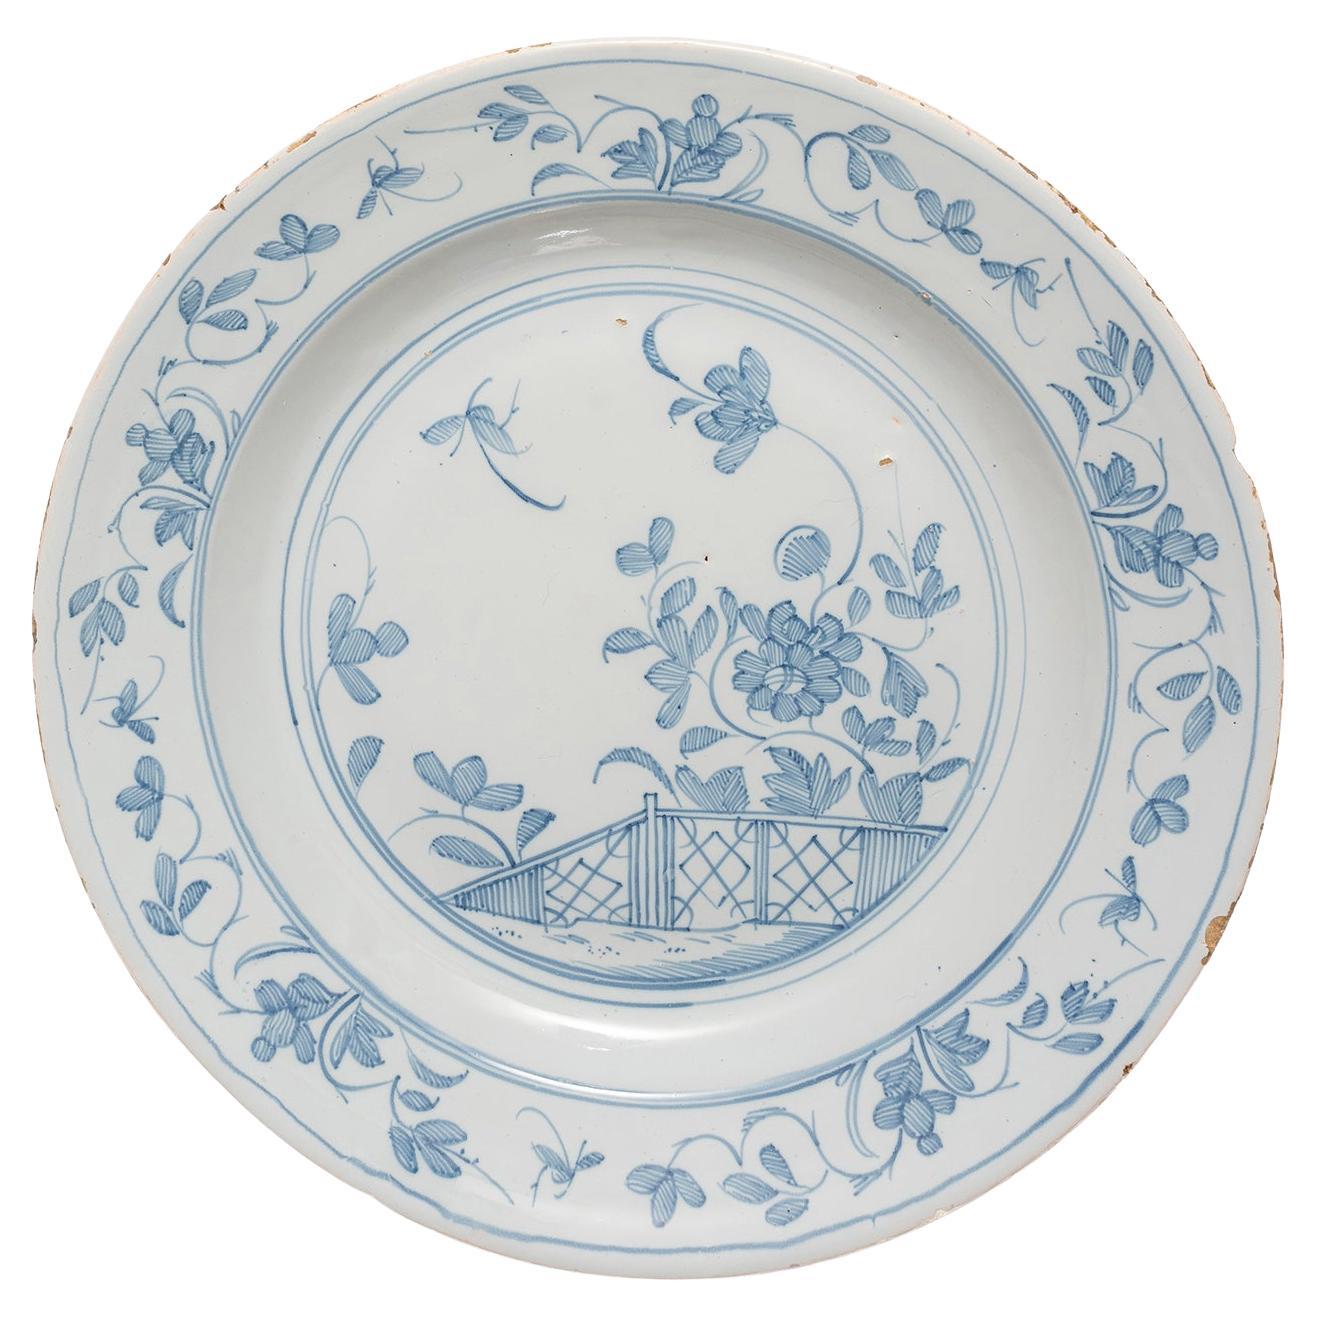 Dish, delftware, English, Liverpool, blue white butterfly 35cm 13 3/4" c1760